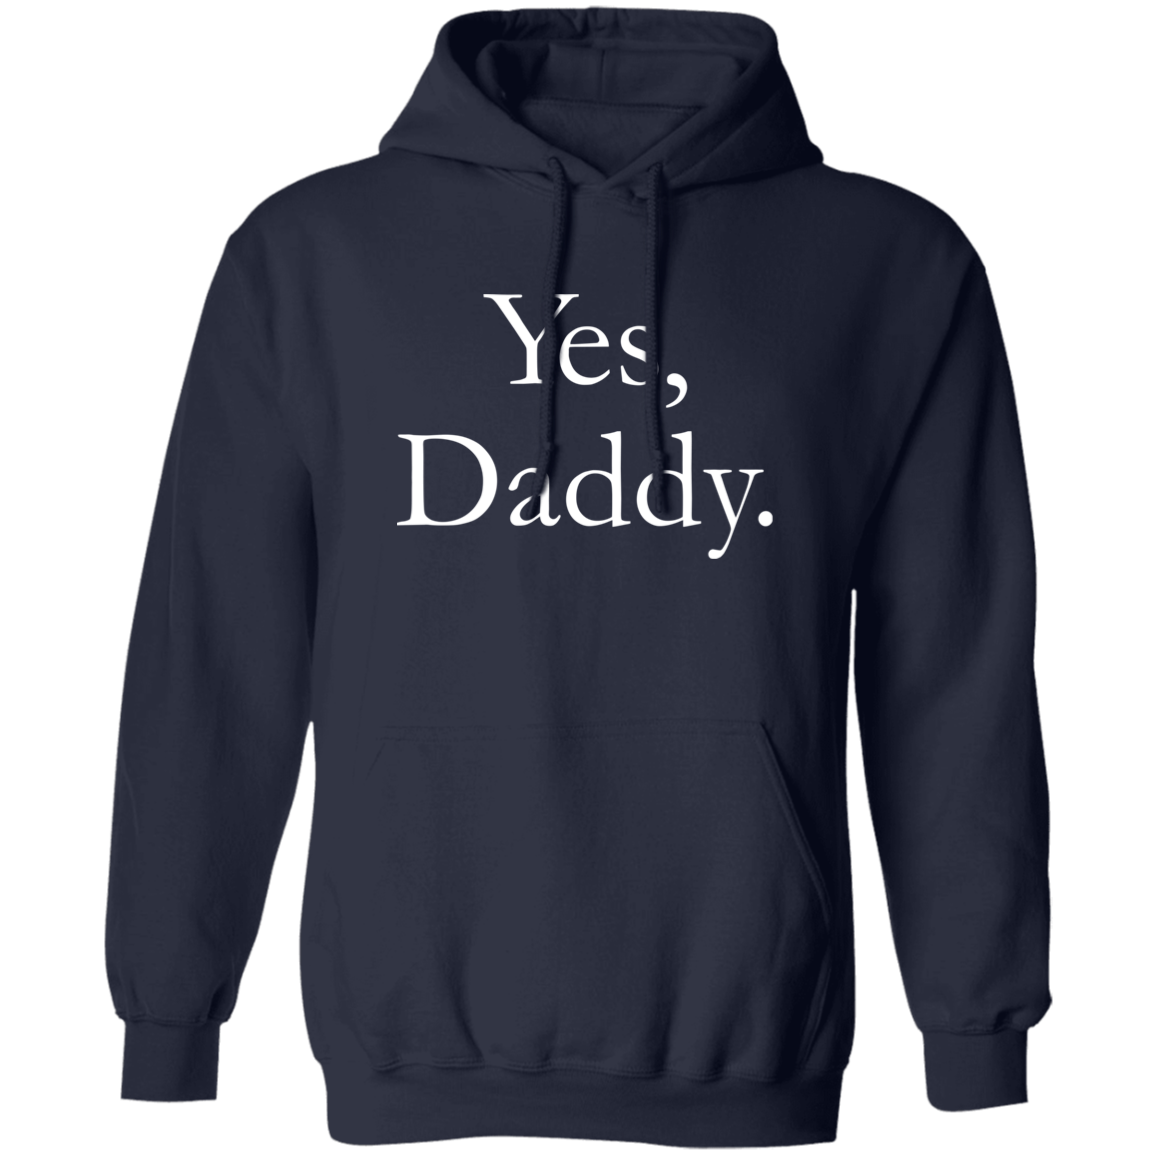 Yes, Daddy Apparel